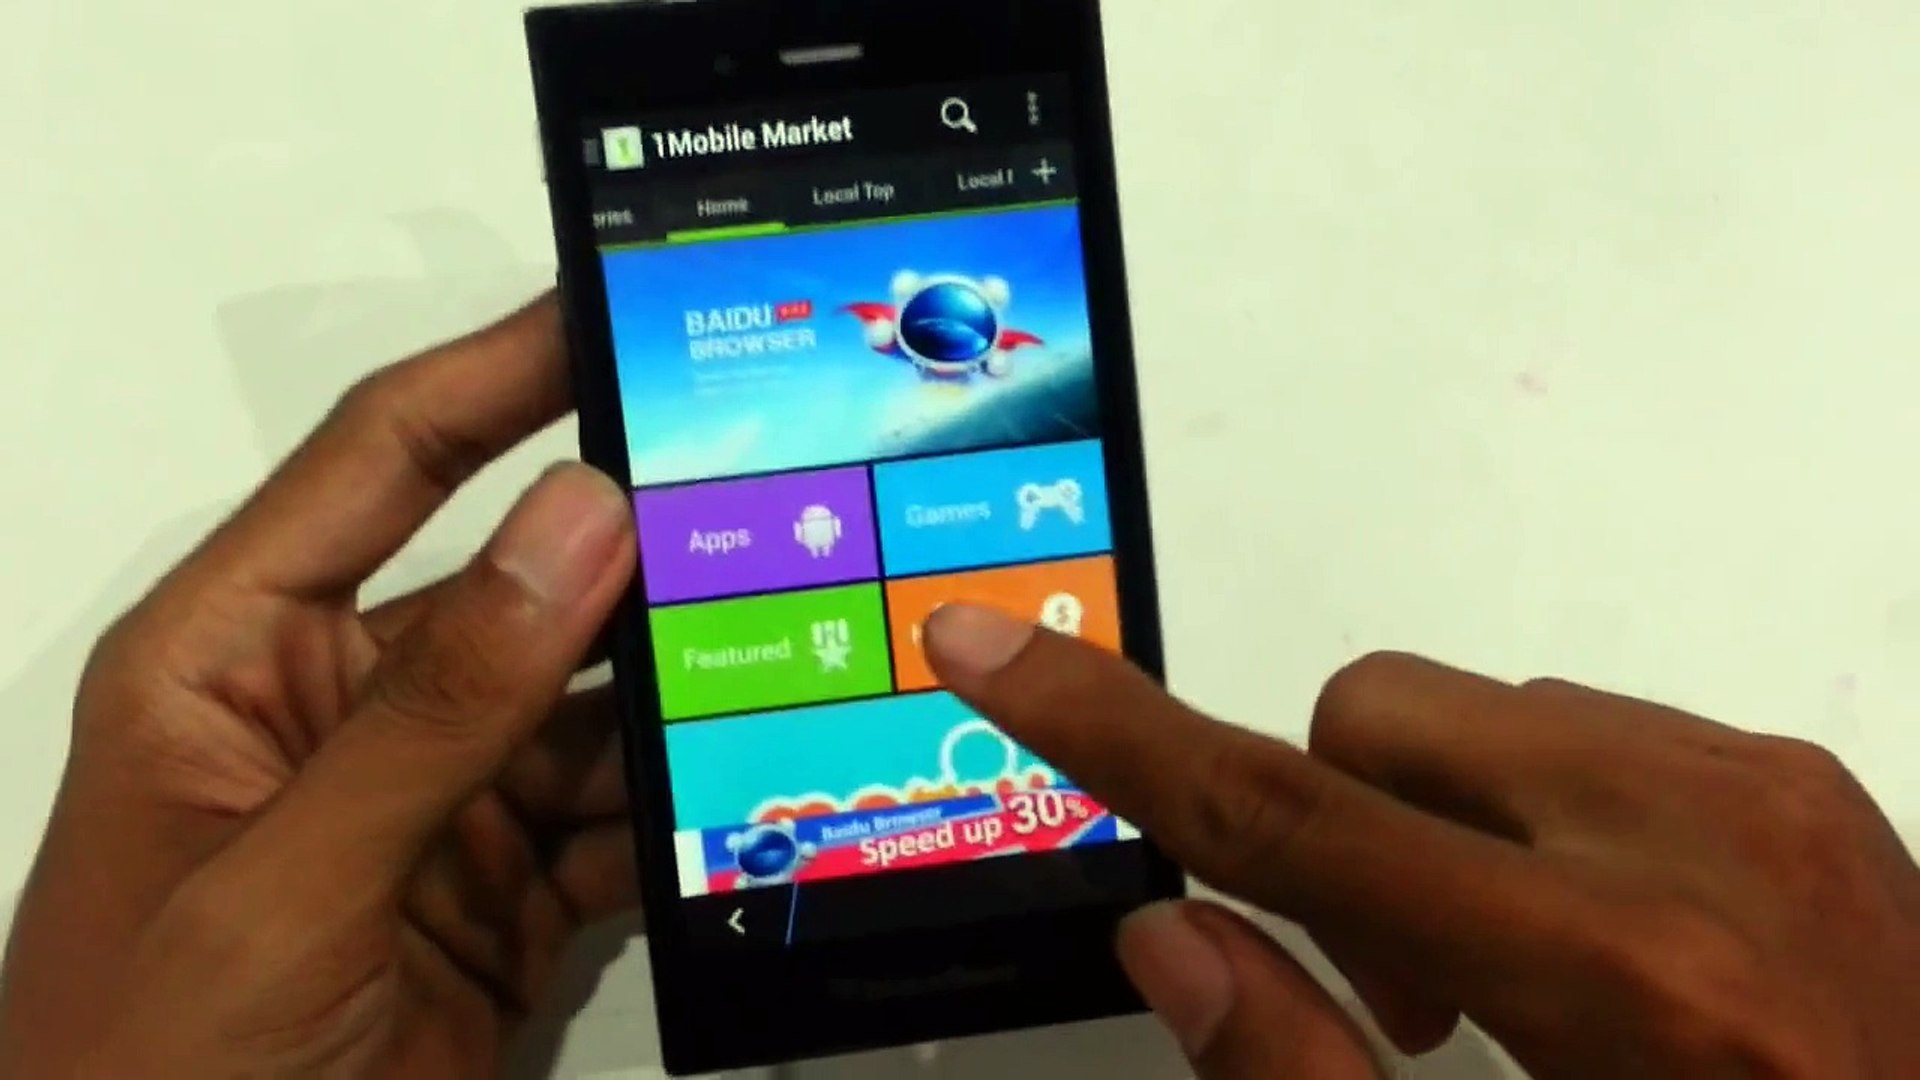 Blackberry Z3 Run Android Apps Tips And Trick By Flashgadgetstore Indonesia Video Dailymotion